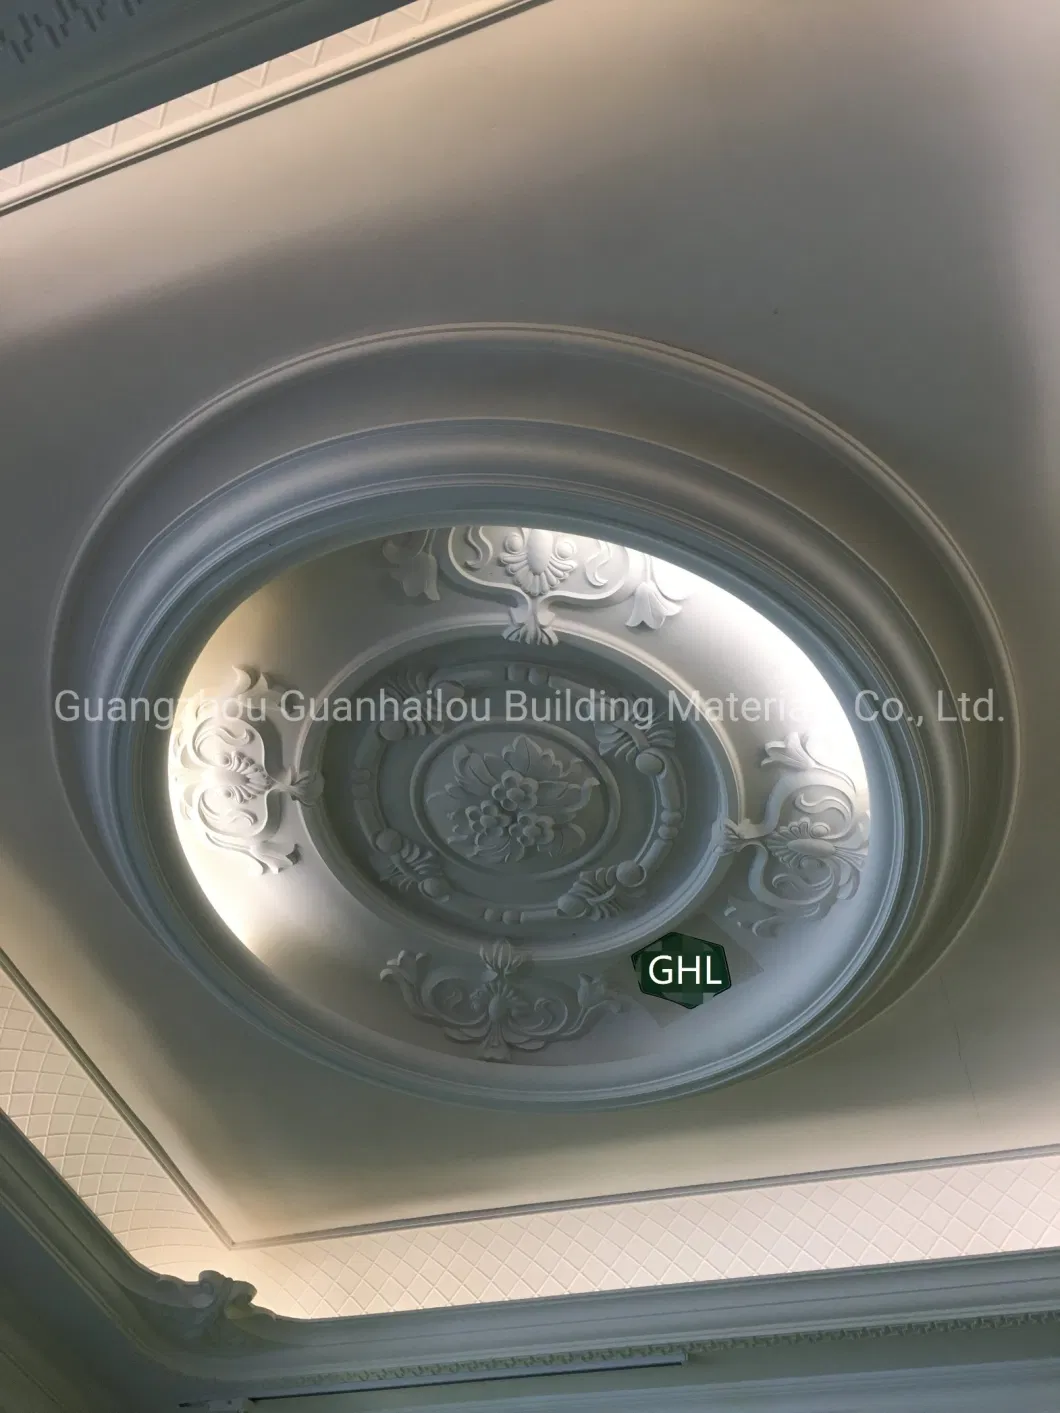 Top Glassfiber Reinforced Plastic/ Resin ceiling Cornice Mould